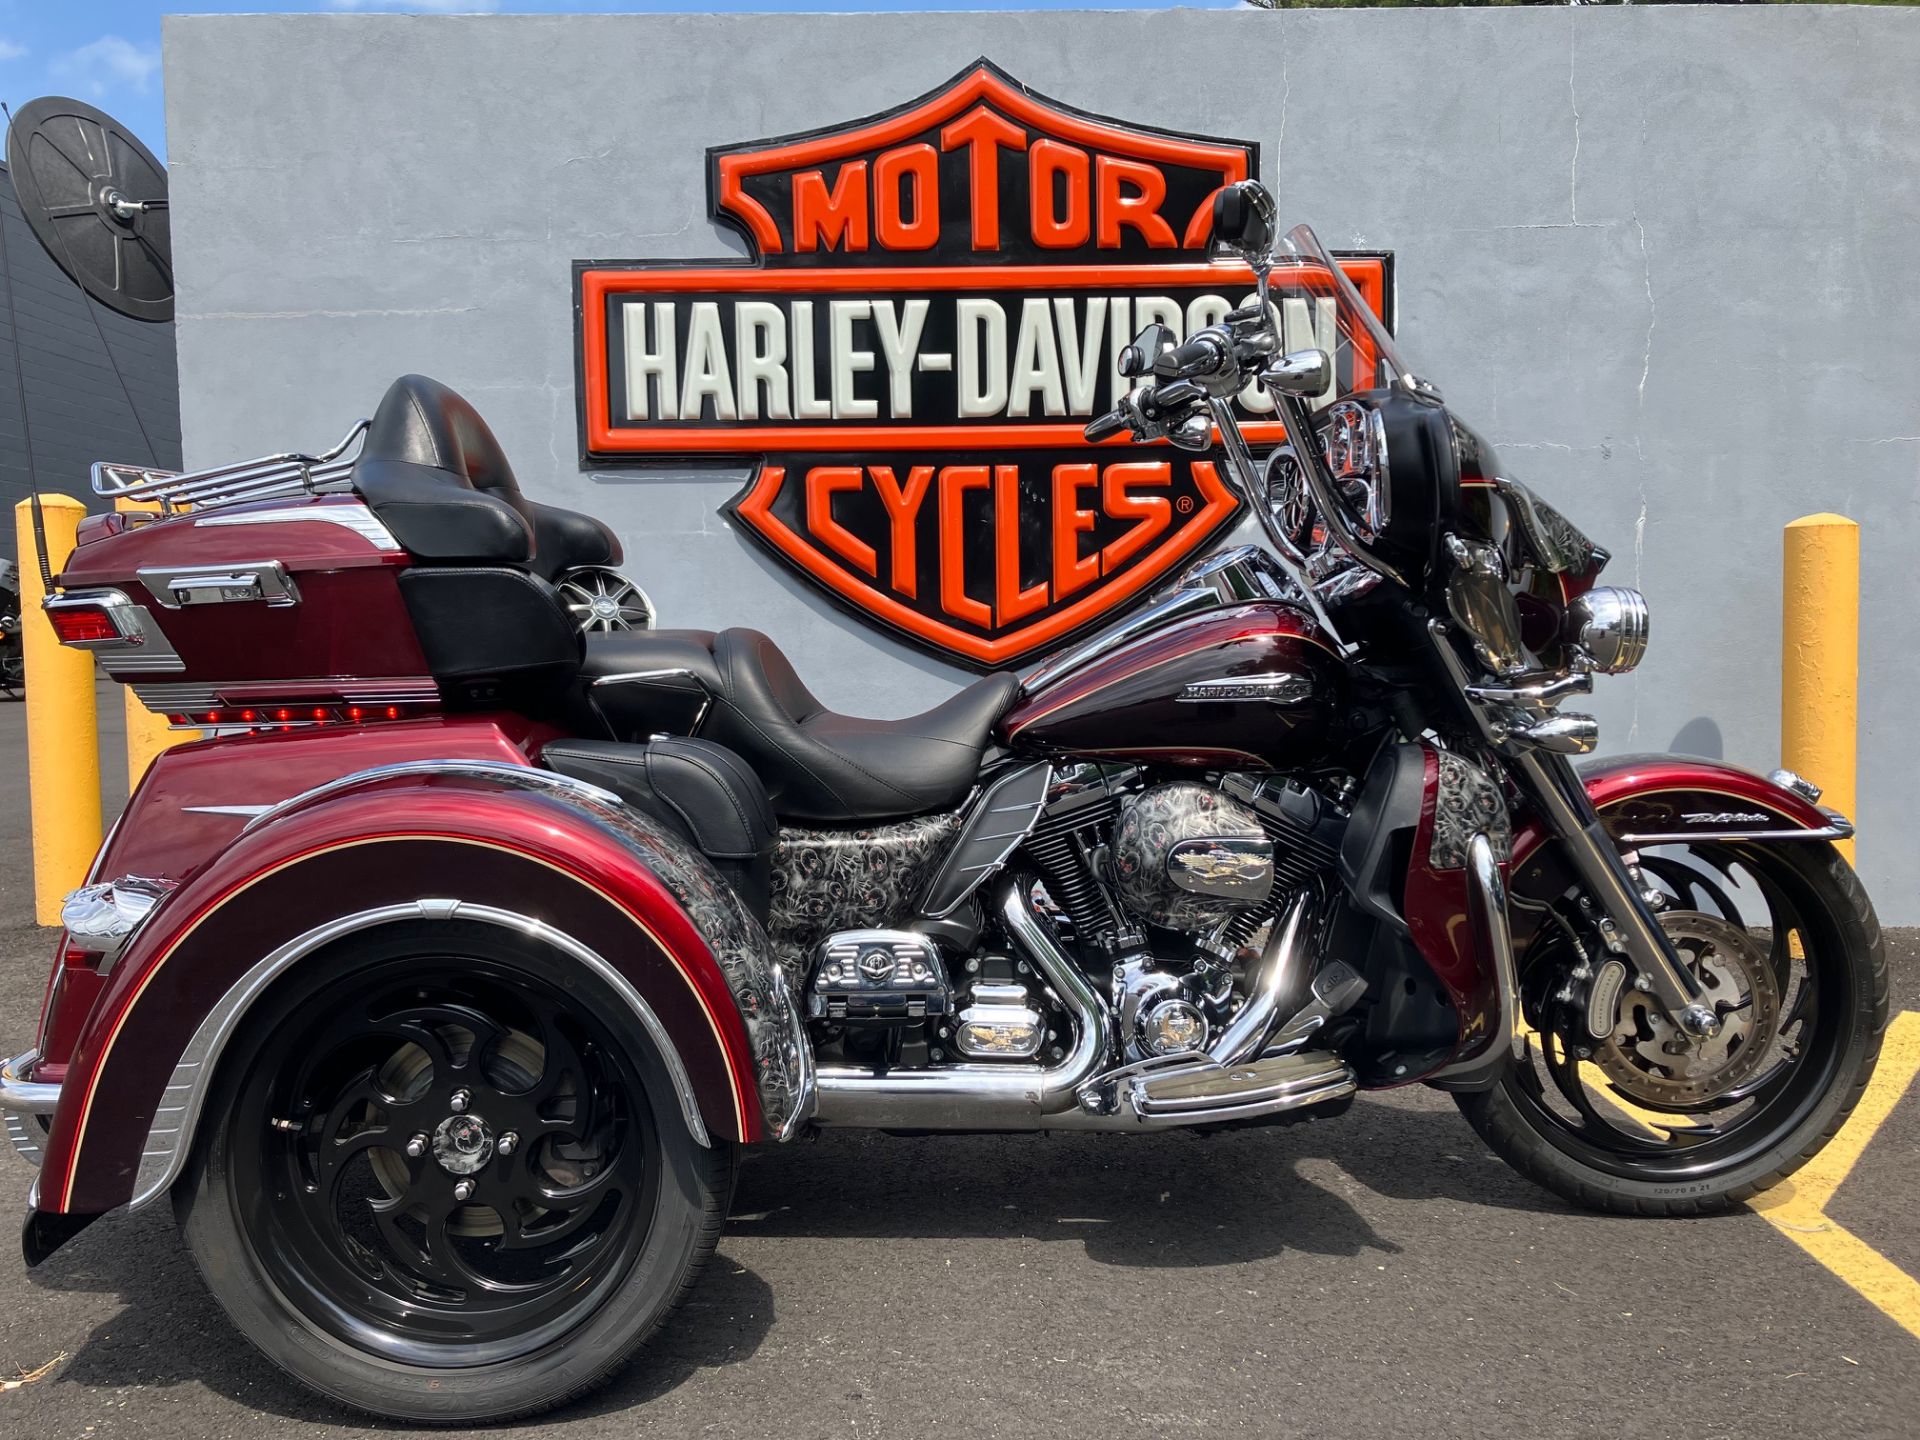 2014 Harley-Davidson TRI GLIDE ULTRA CLASSIC in West Long Branch, New Jersey - Photo 1